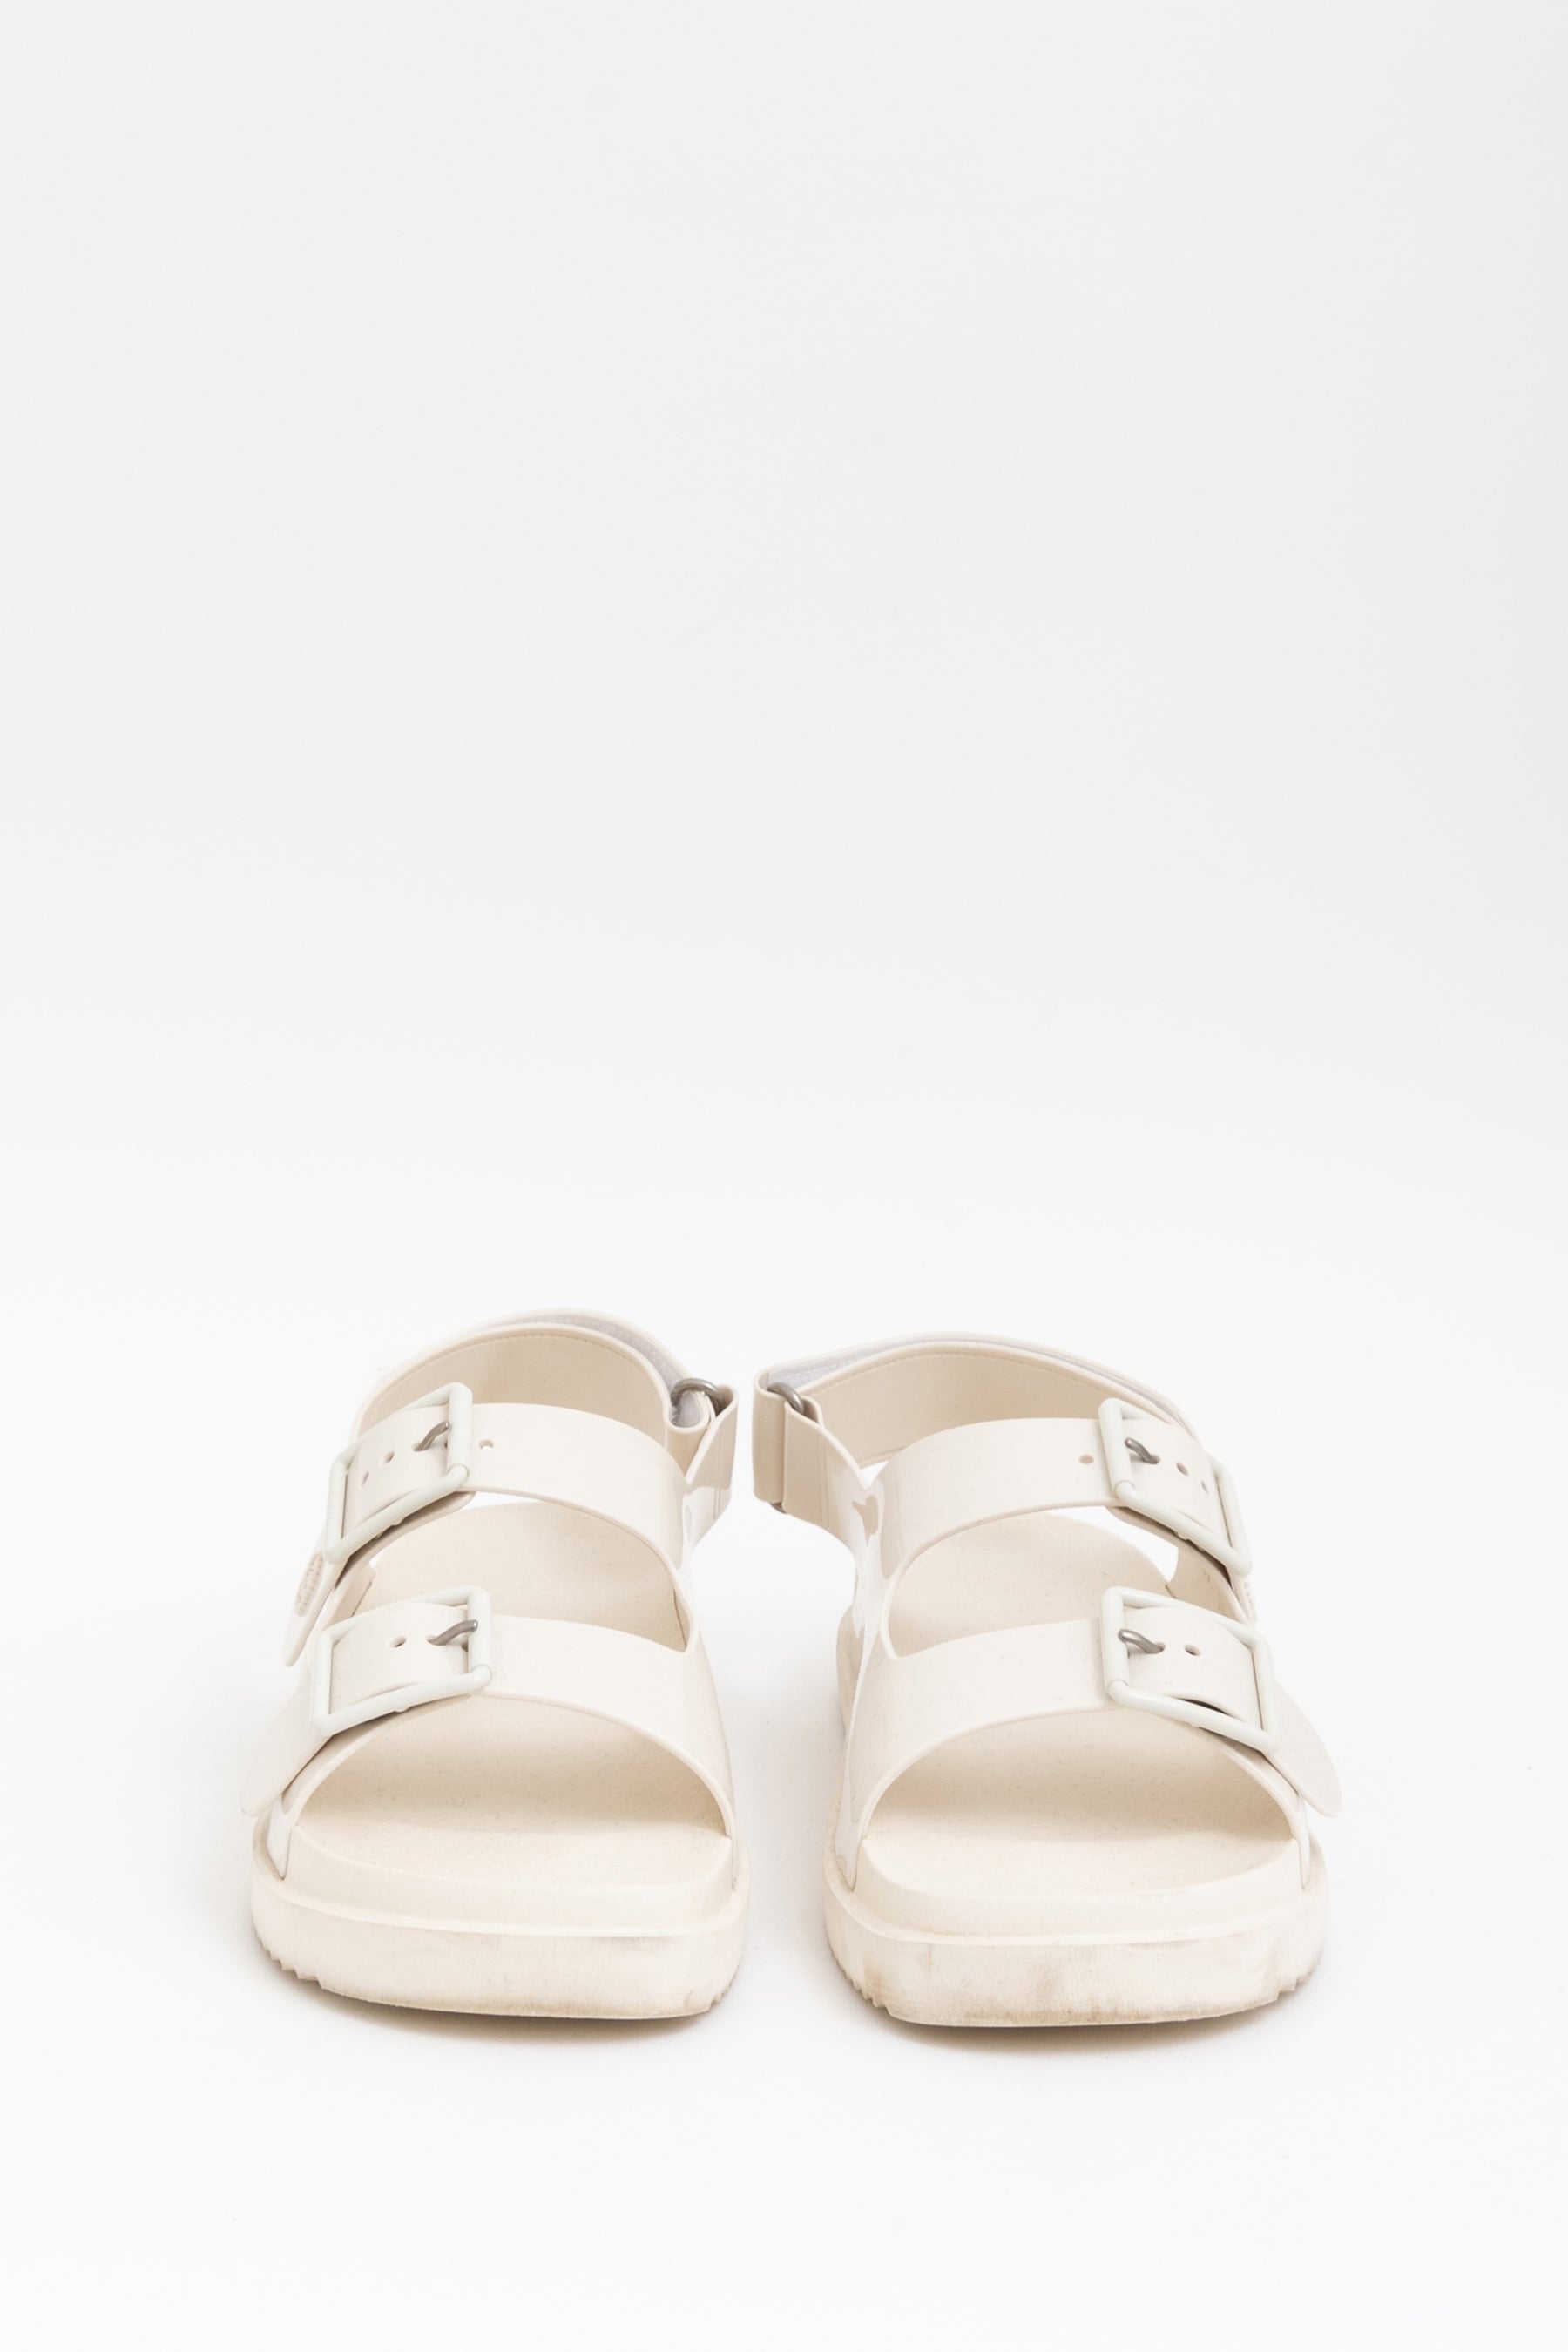 Isla Buckled Rubber Sandals